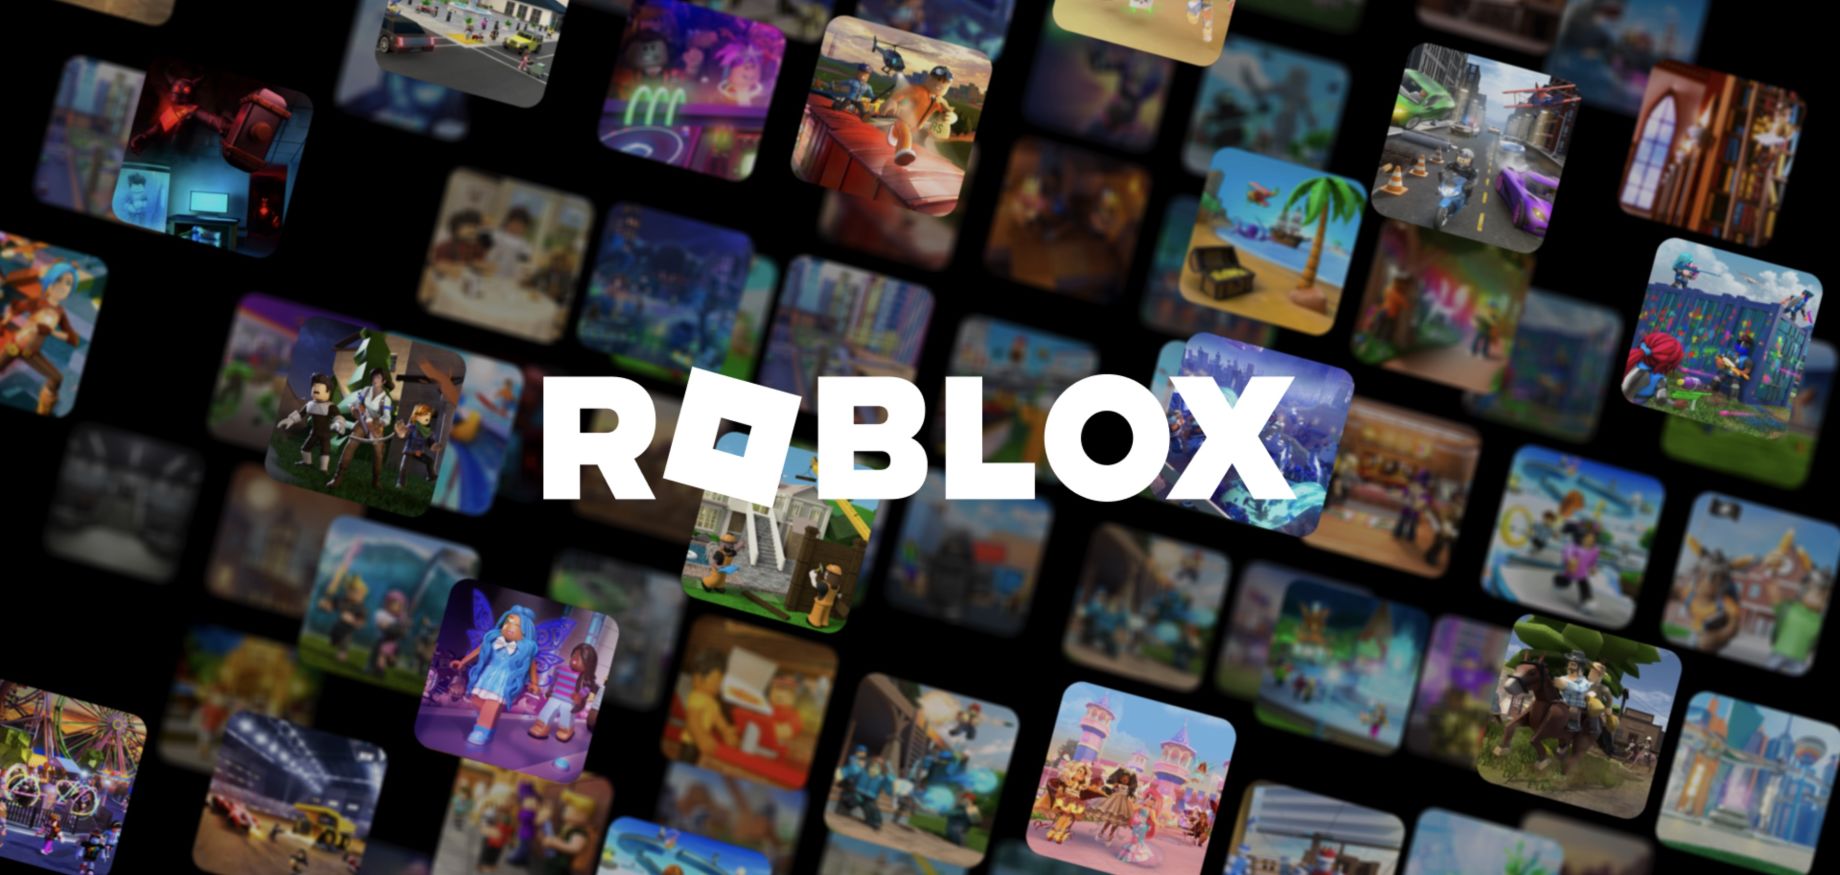 Video Discussion: PlayStation - Roblox - Launch Trailer